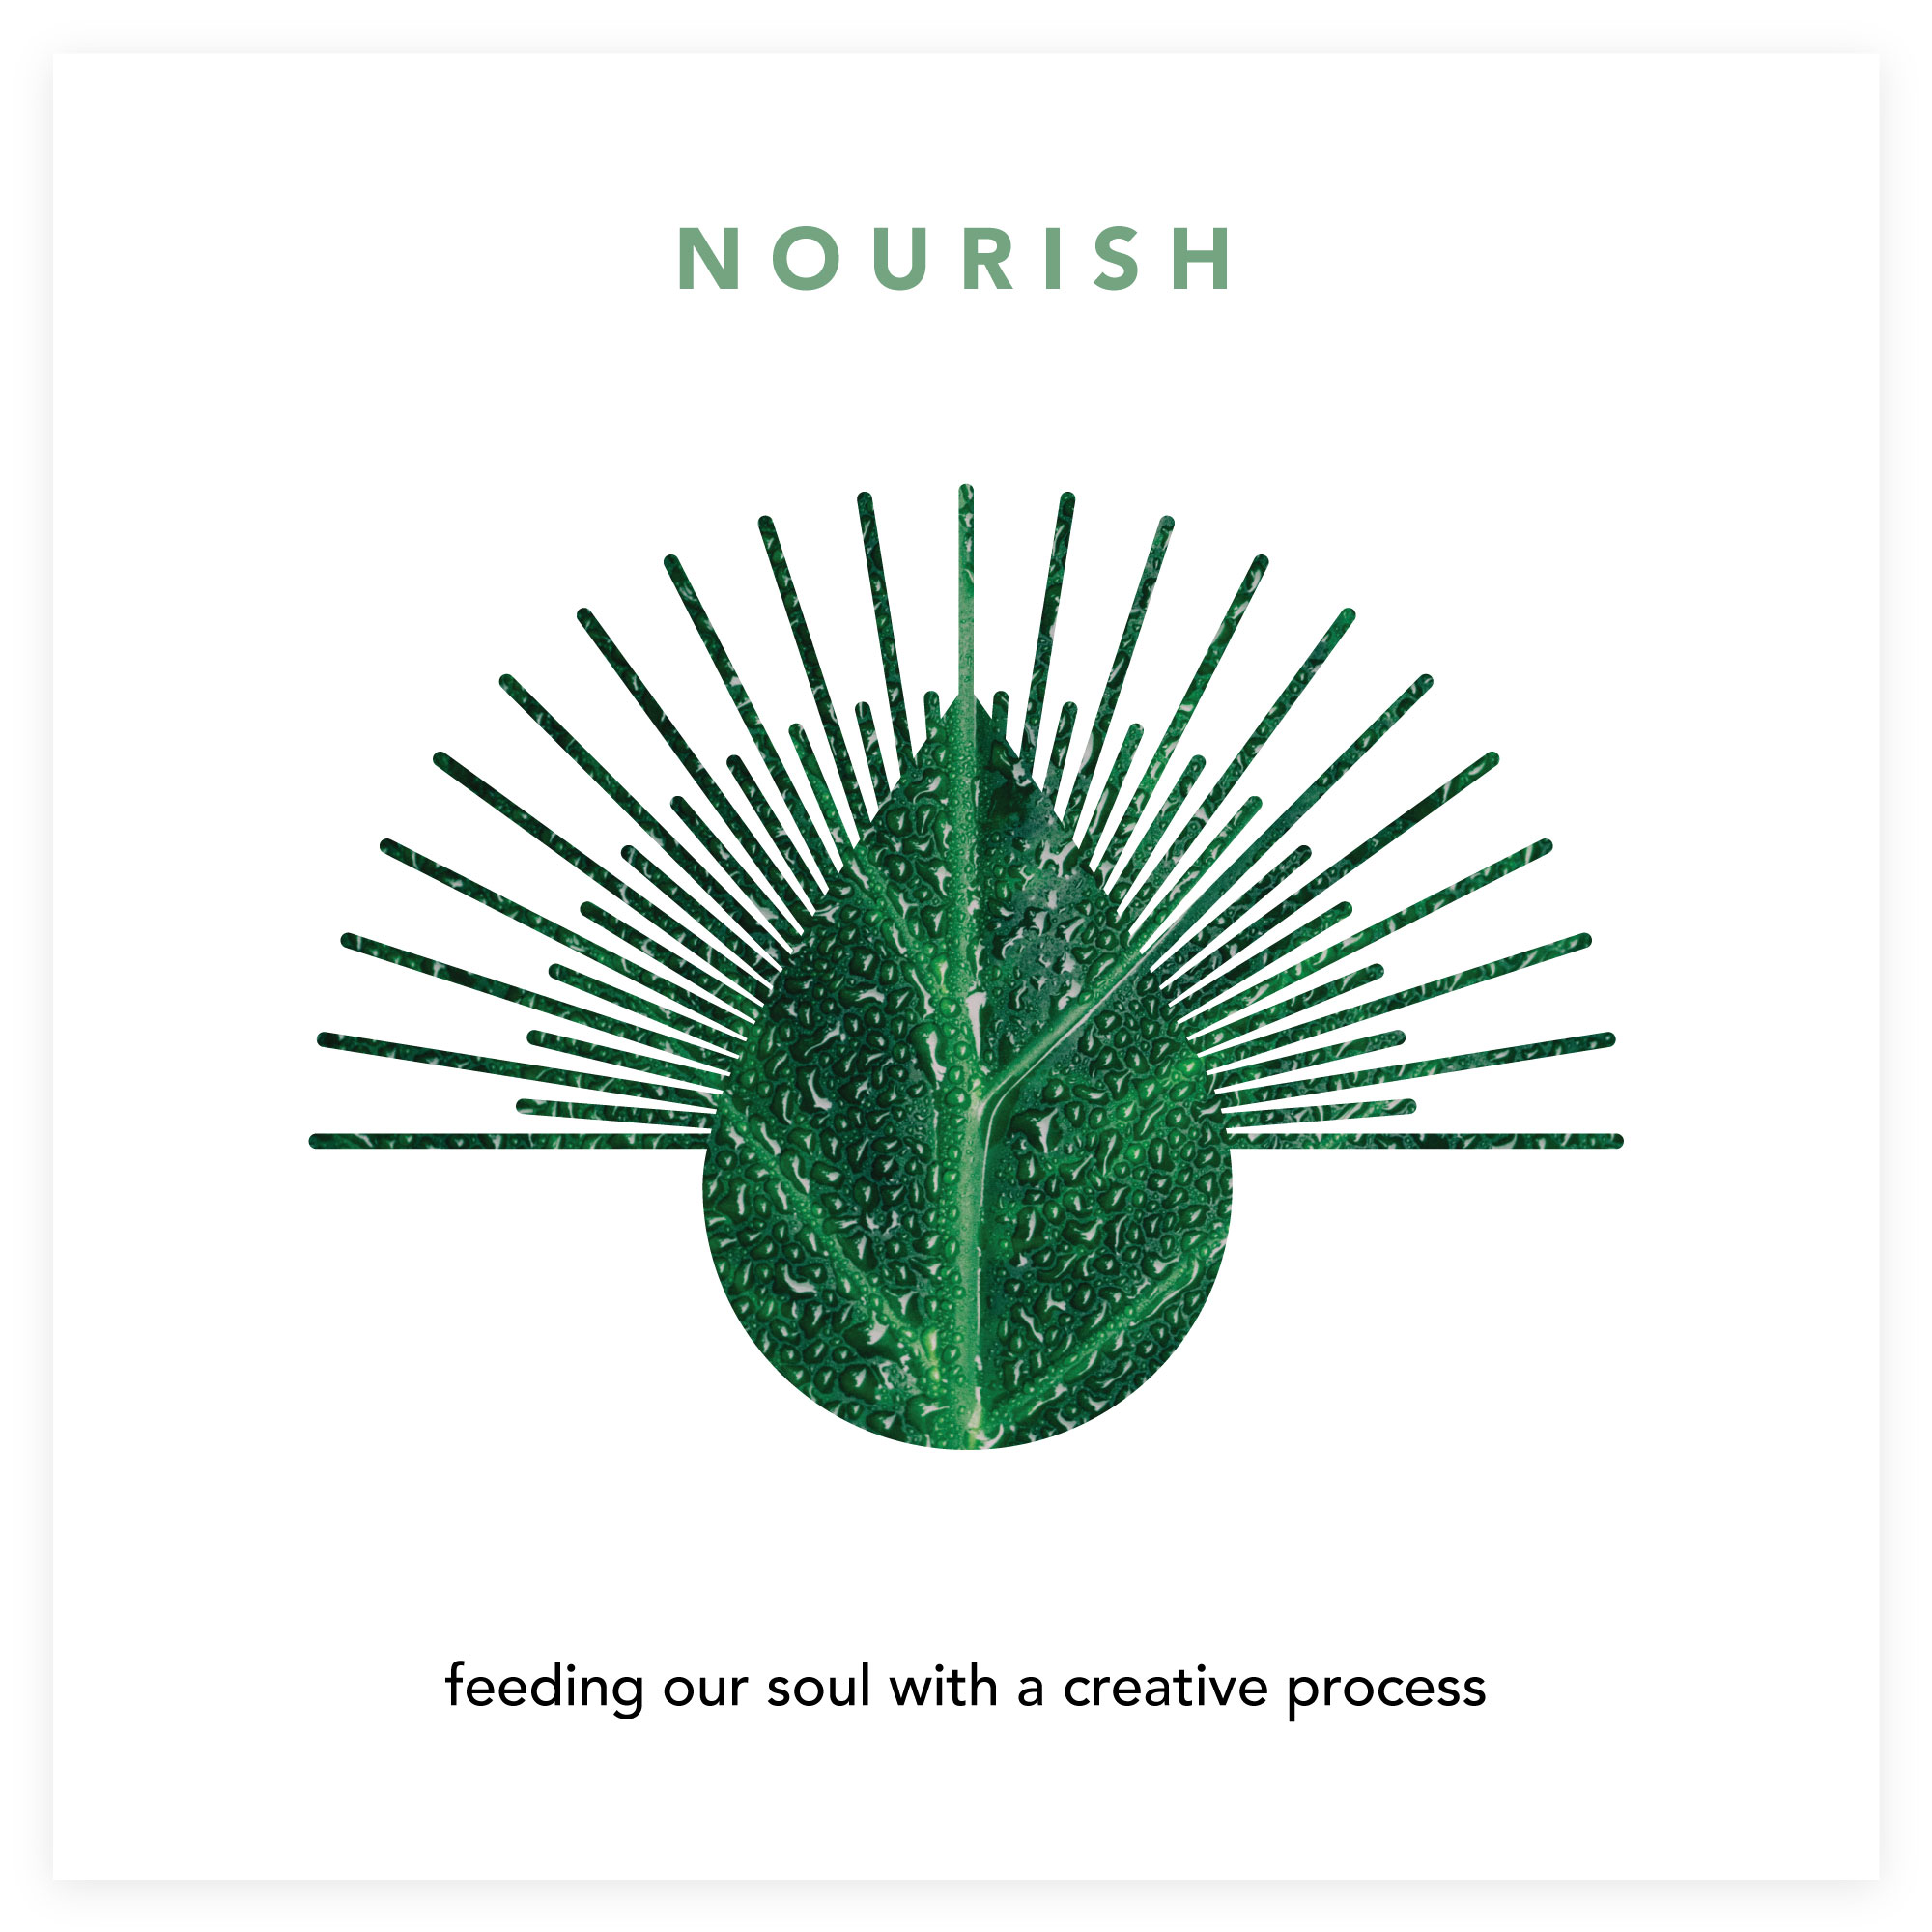 NOURISH - feeding our soul with a creative process